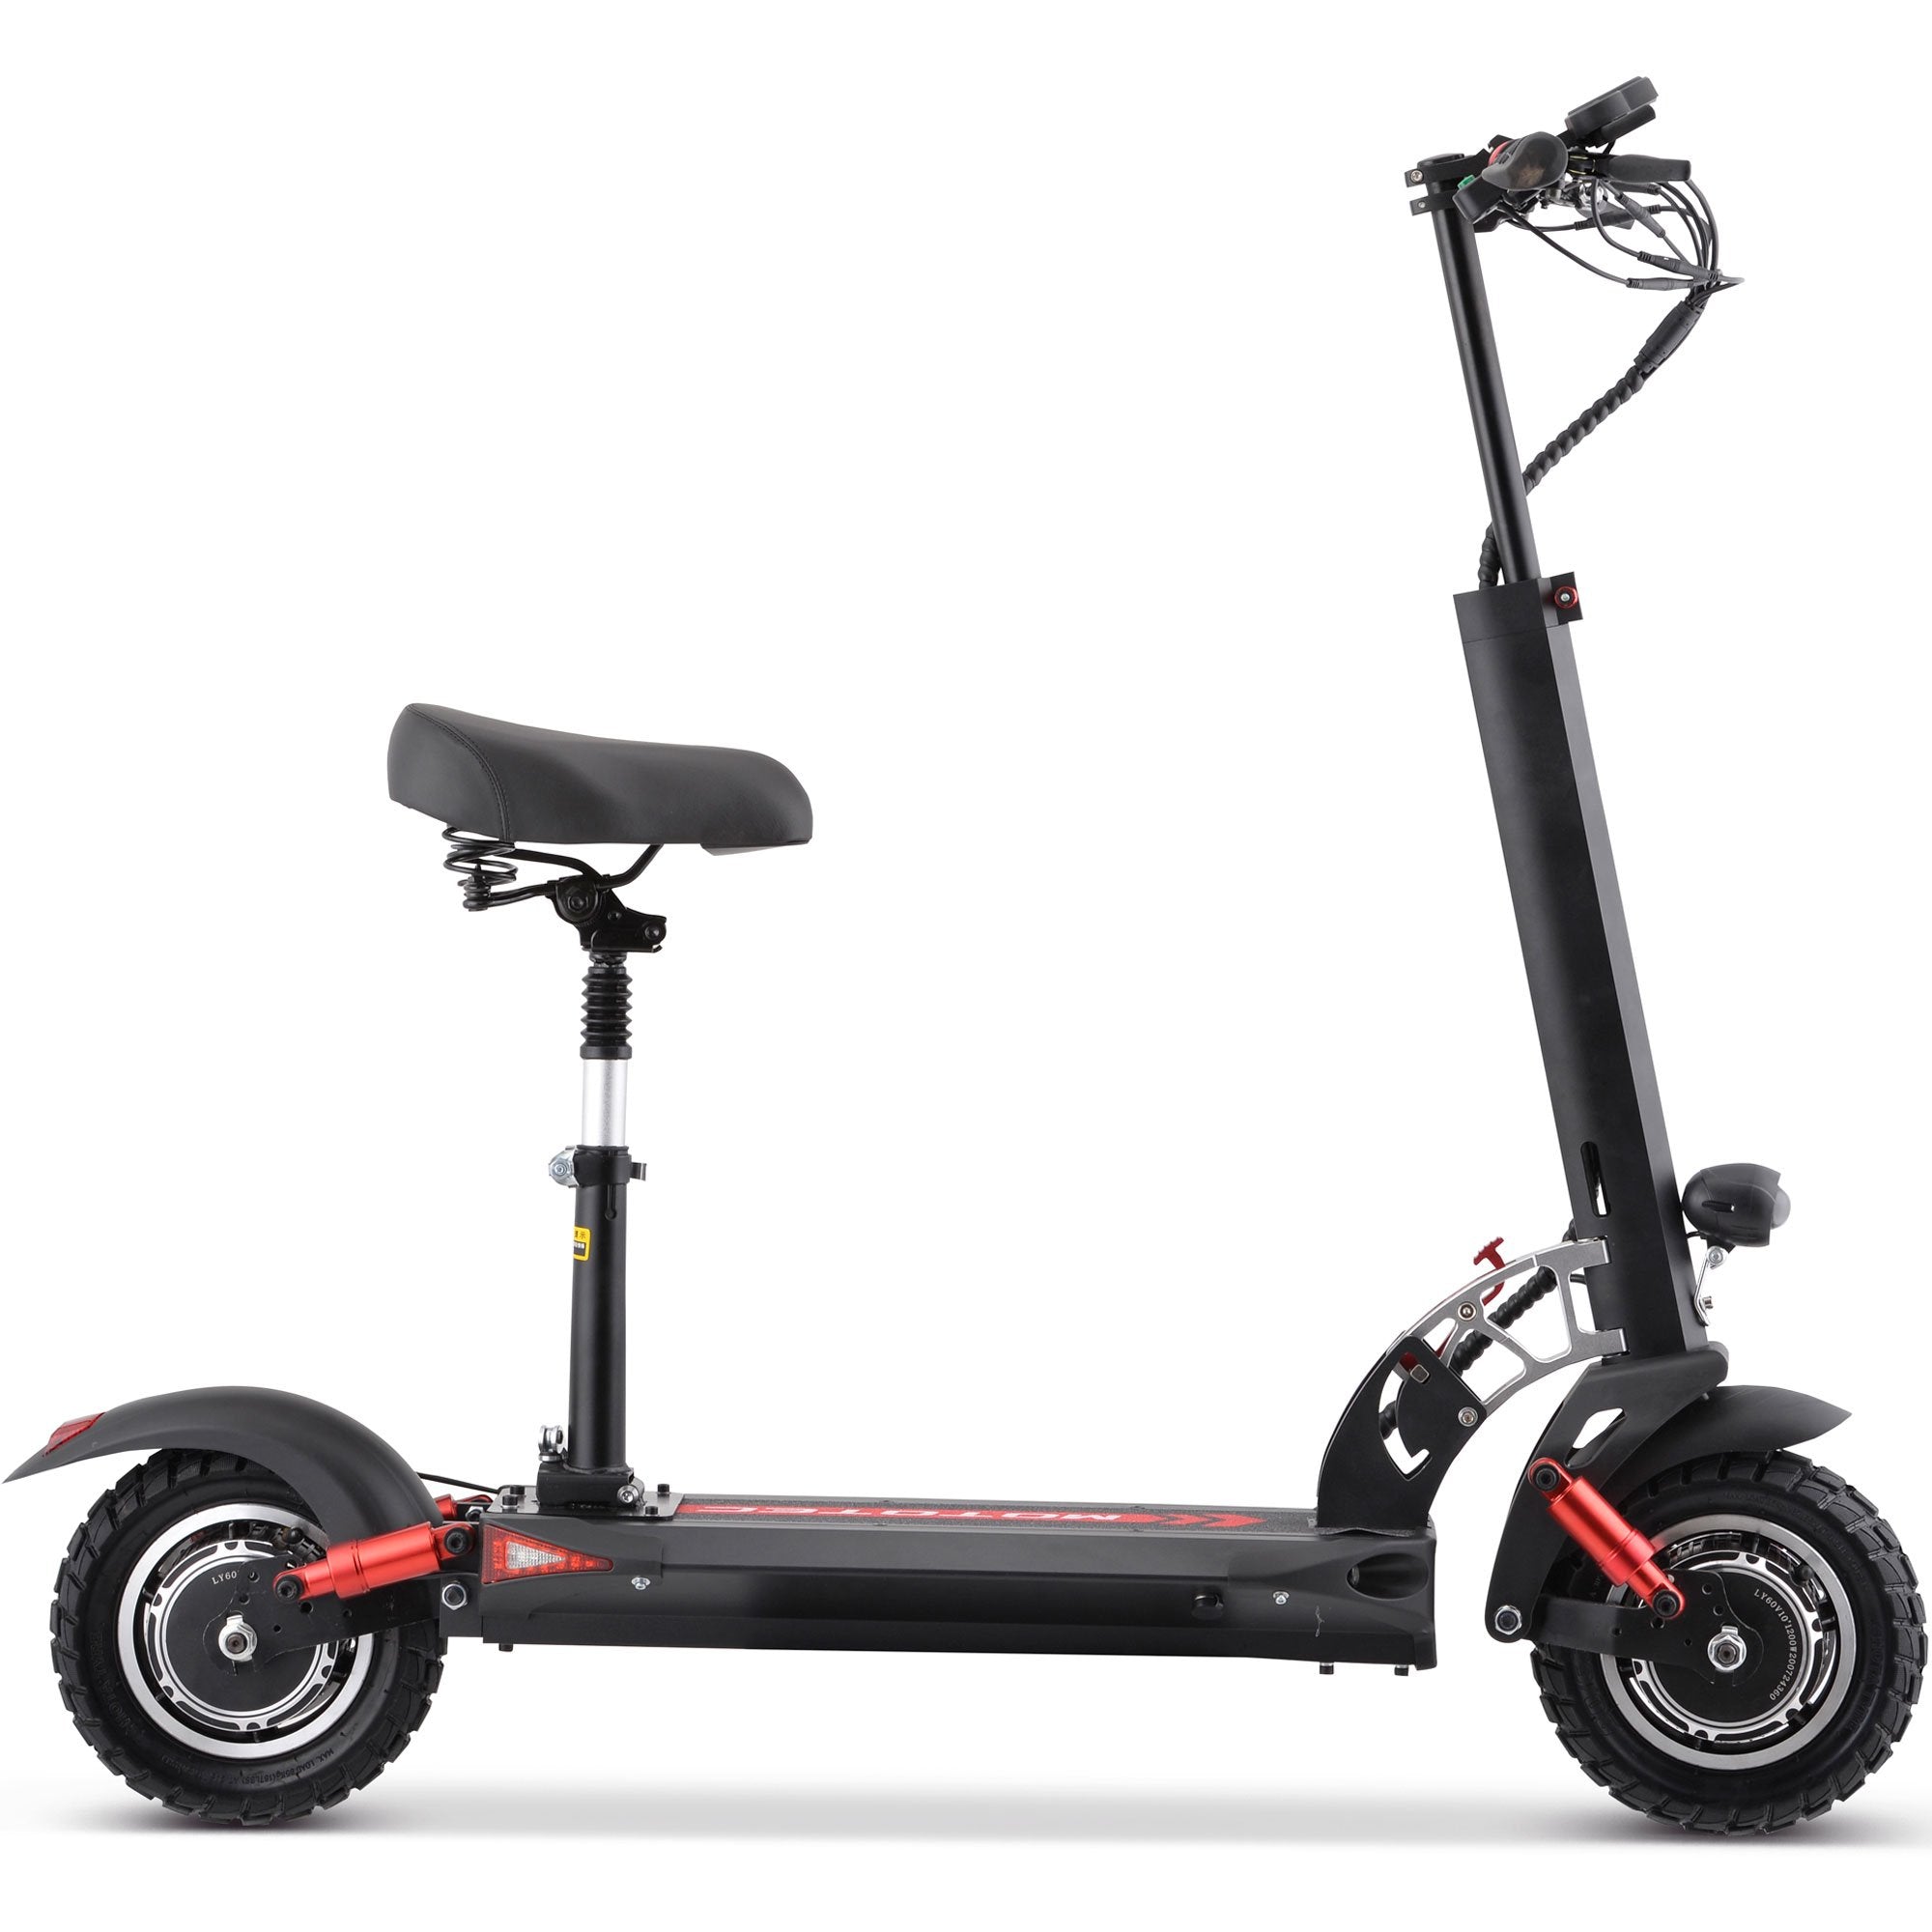 Thor 60v 2400w Electric Scooter Black – Electric Rides